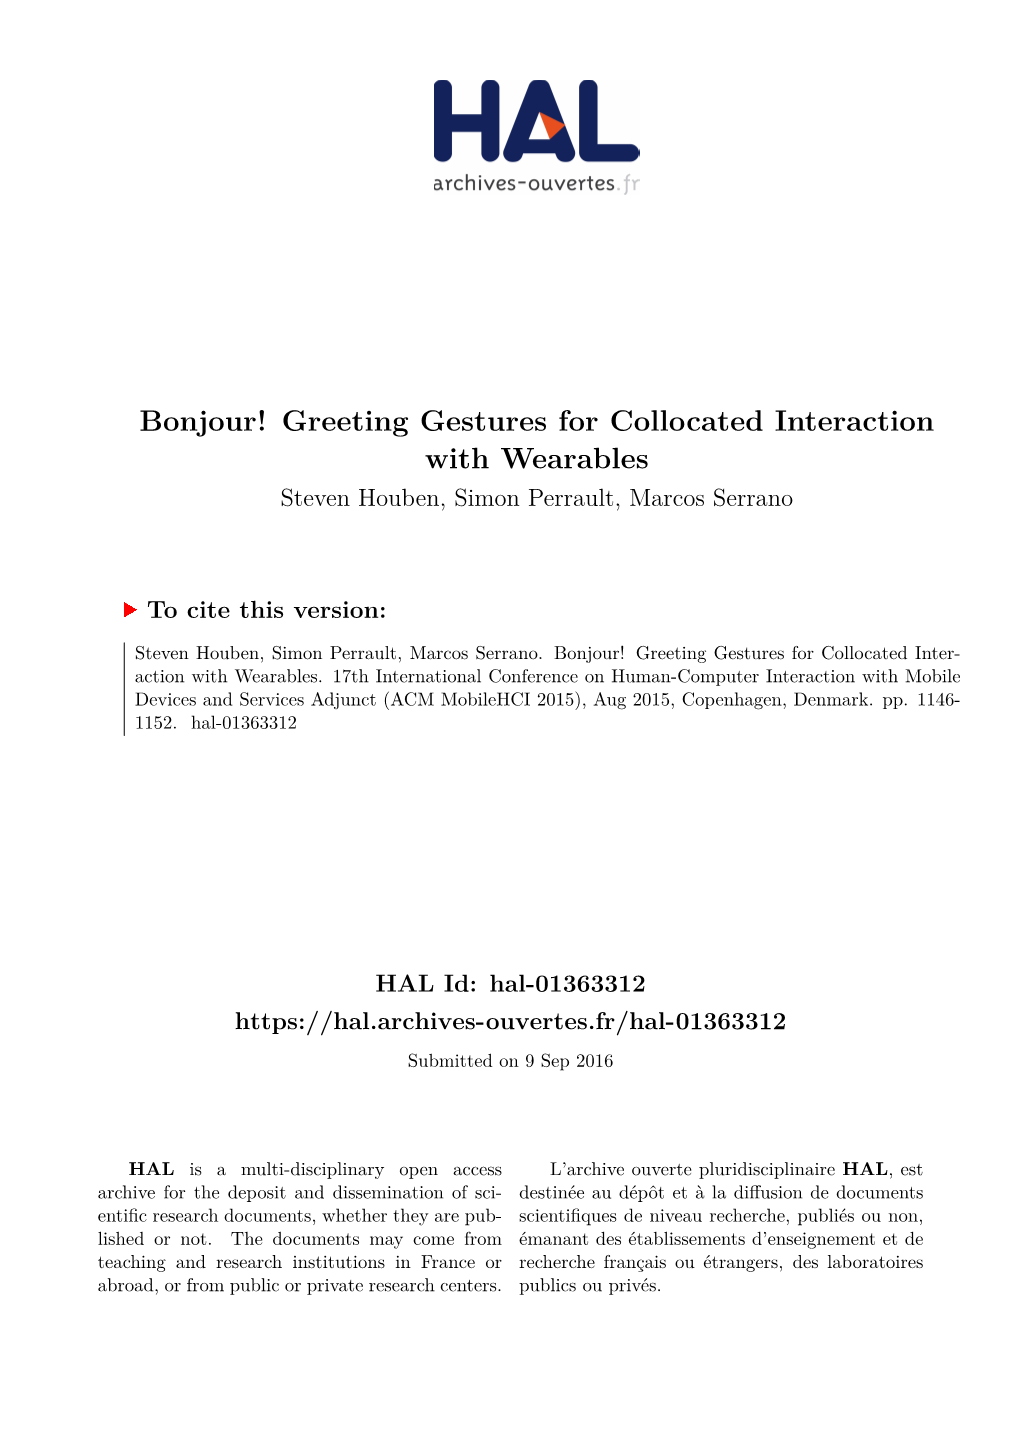 Greeting Gestures for Collocated Interaction with Wearables Steven Houben, Simon Perrault, Marcos Serrano